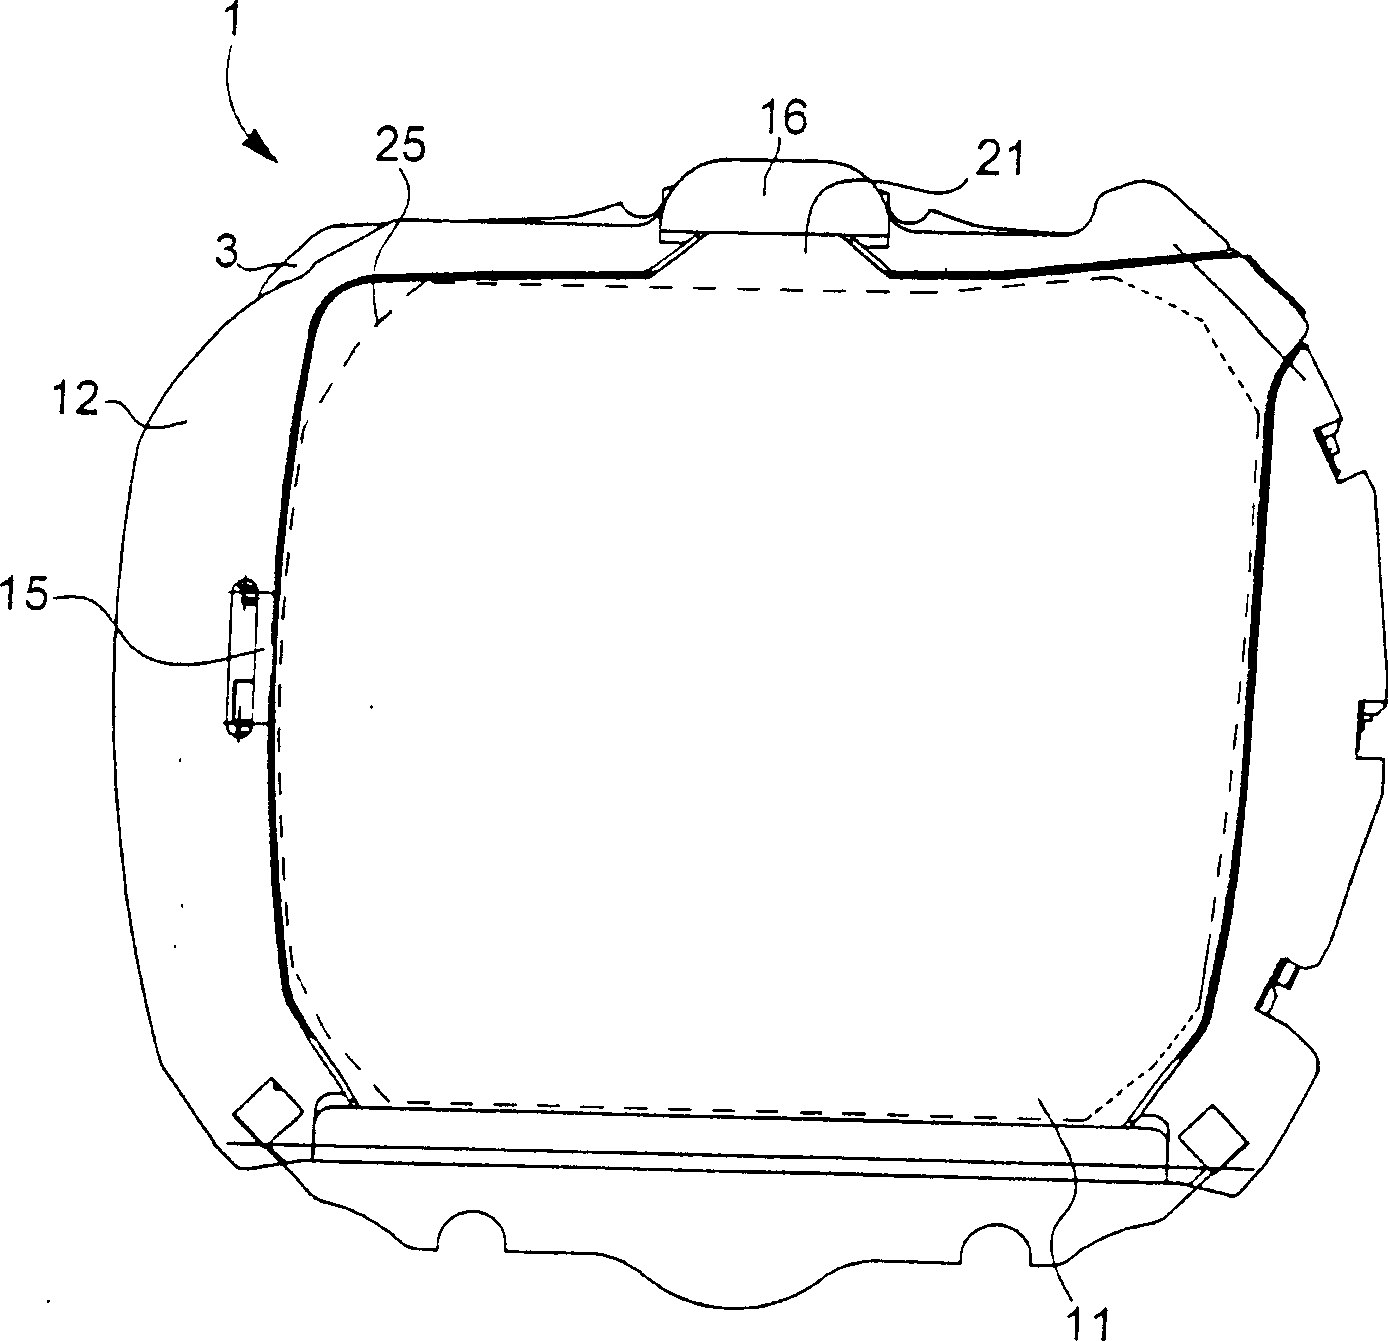 Backlighting device for an information display element of a portable object